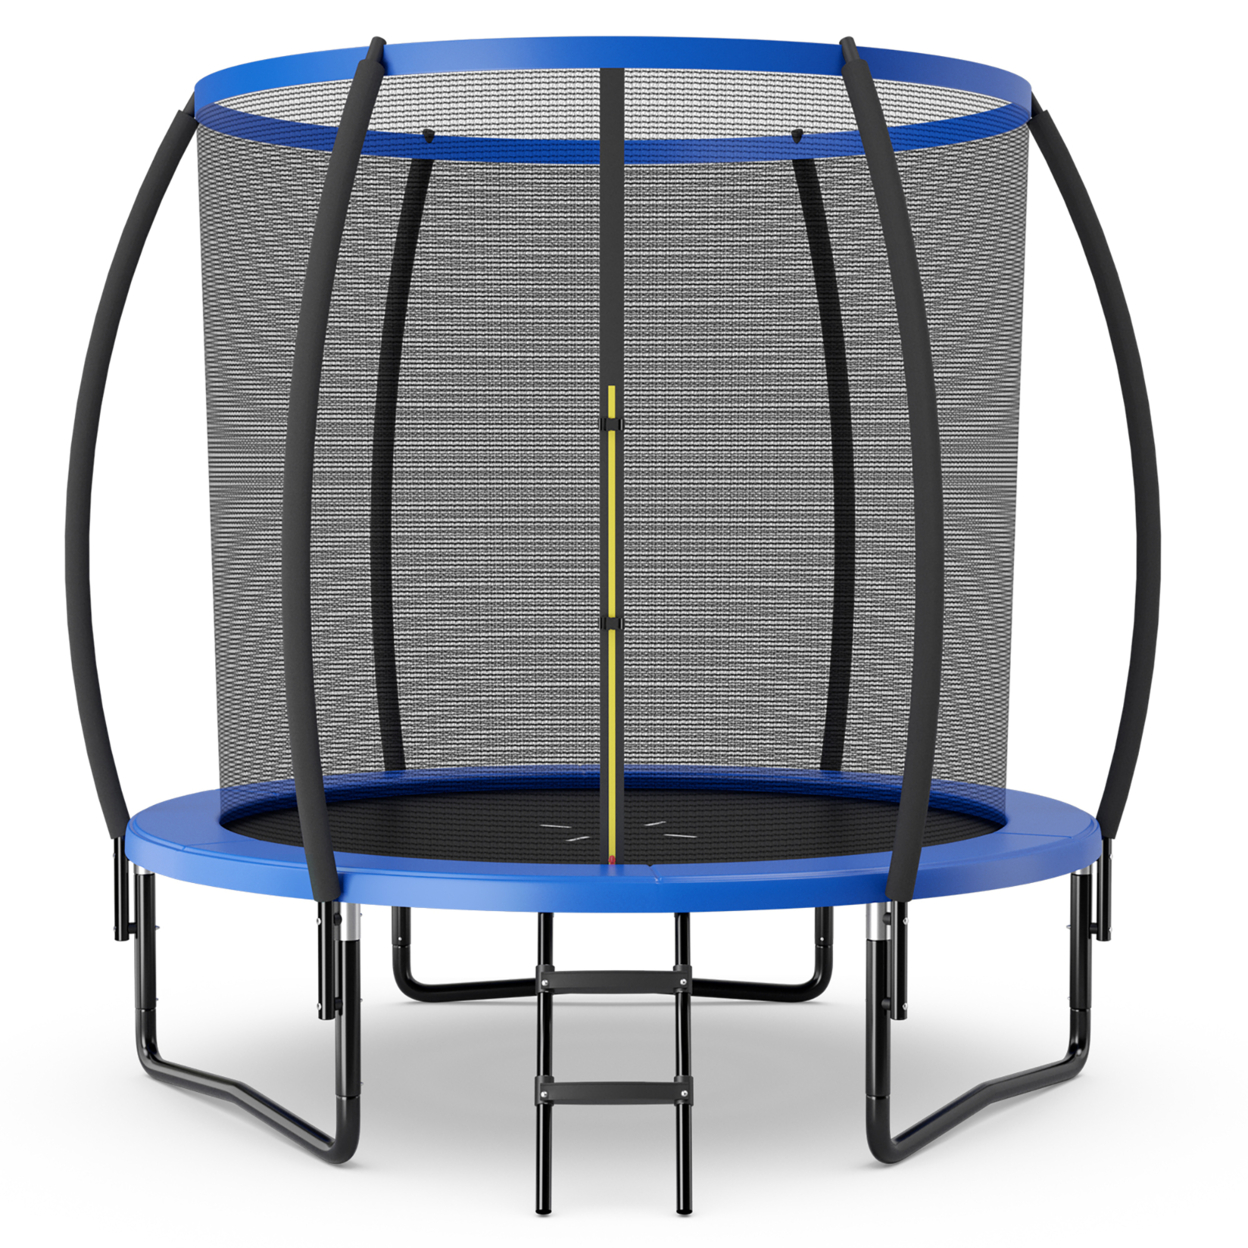 8FT Recreational Trampoline W/ Ladder Enclosure Net Safety Pad Outdoor - Blue